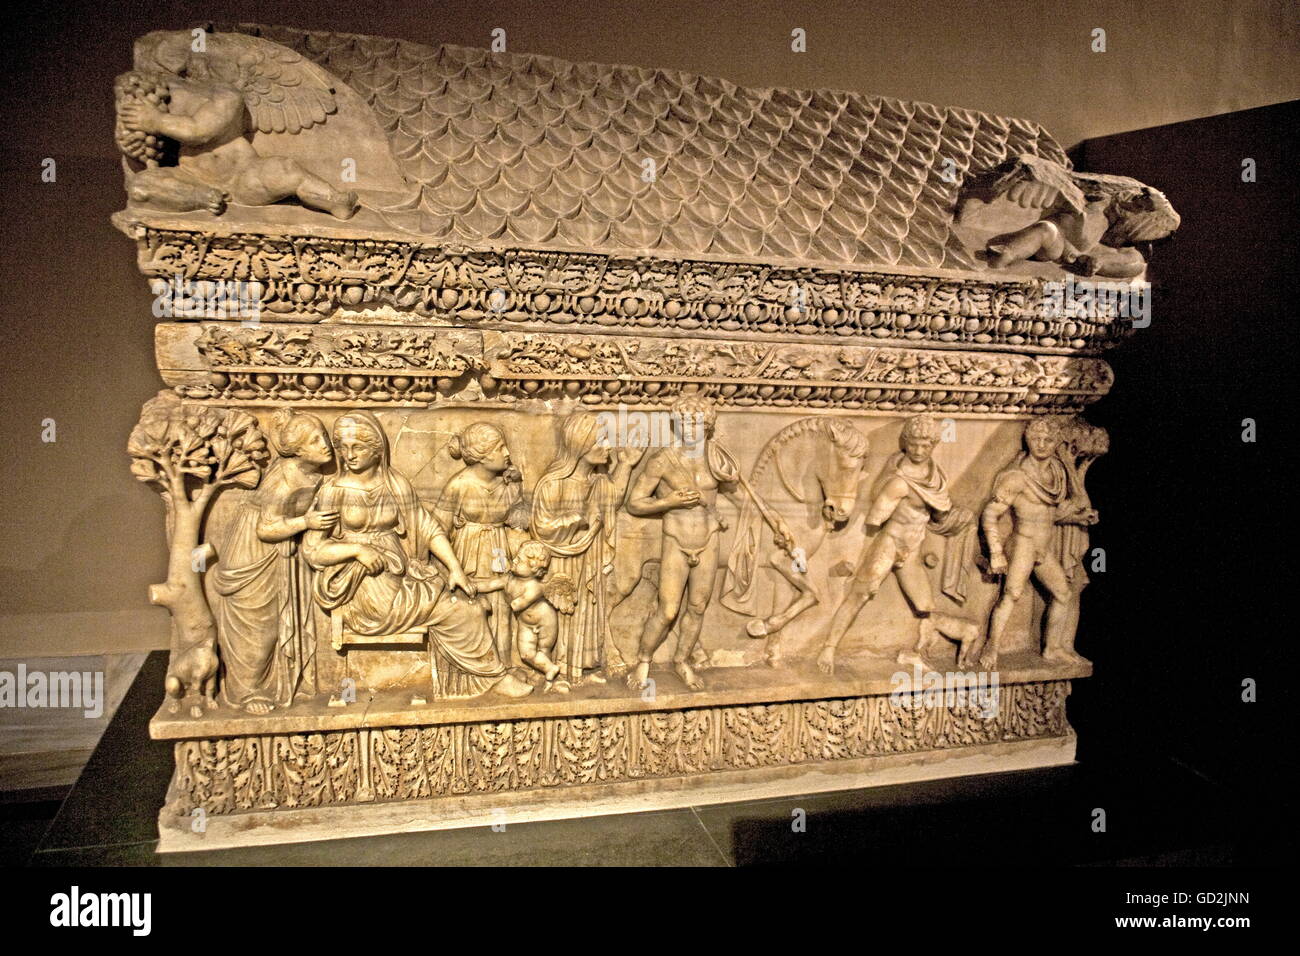 fine arts, ancient world, Phaedra and Hippolyta on a Roman sarcophagus, collection of antiques, archaeological museum, Istanbul, Artist's Copyright has not to be cleared Stock Photo